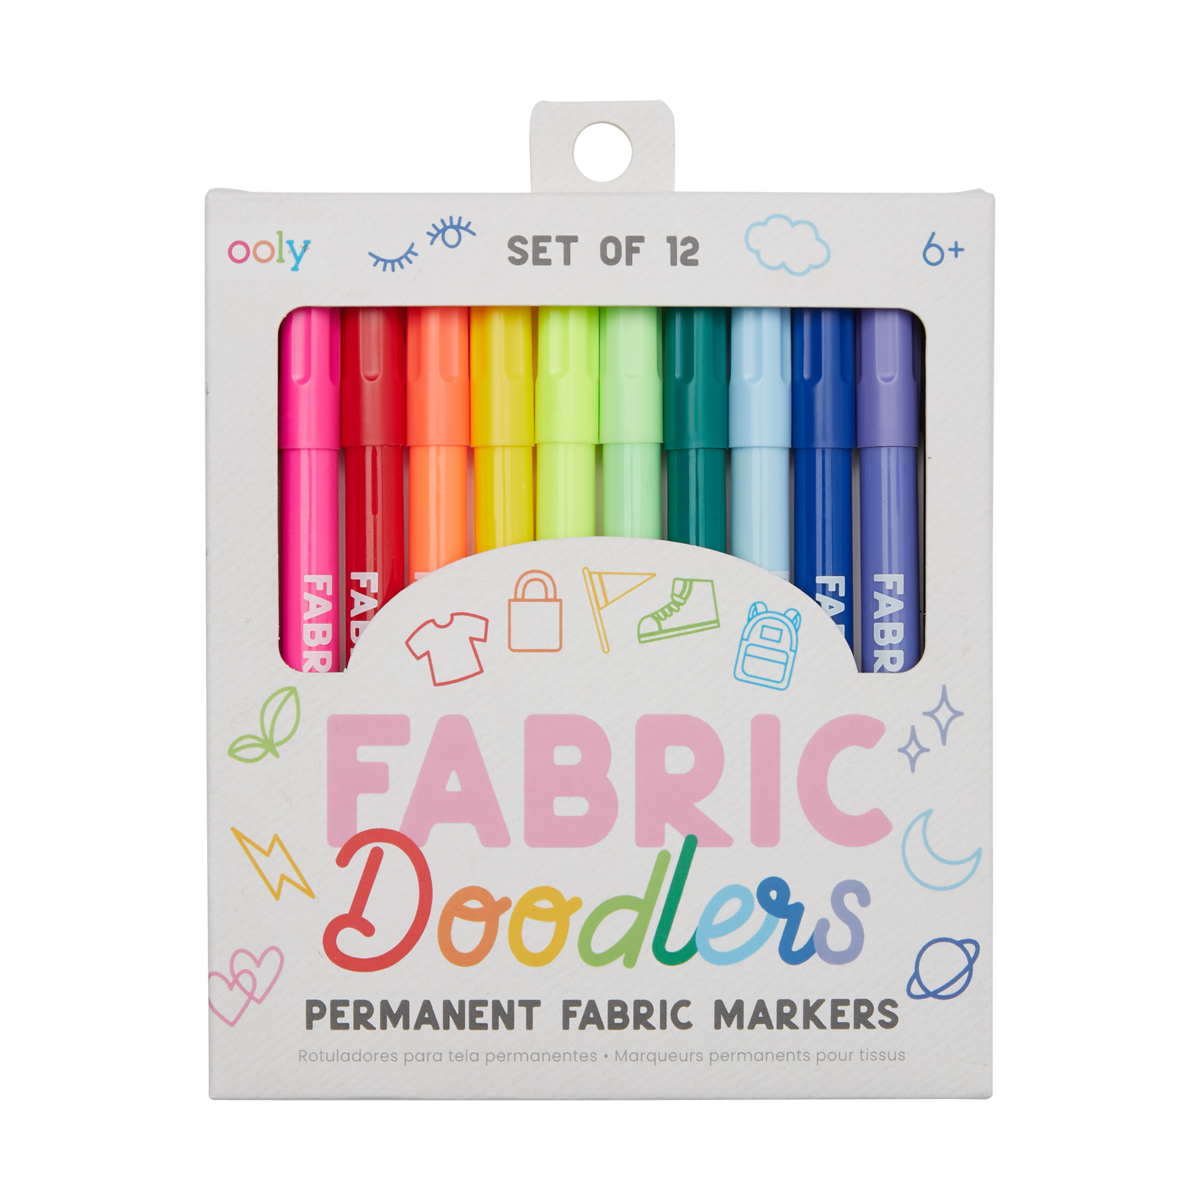 OOLY view of Fabric Doodlers Markers in package